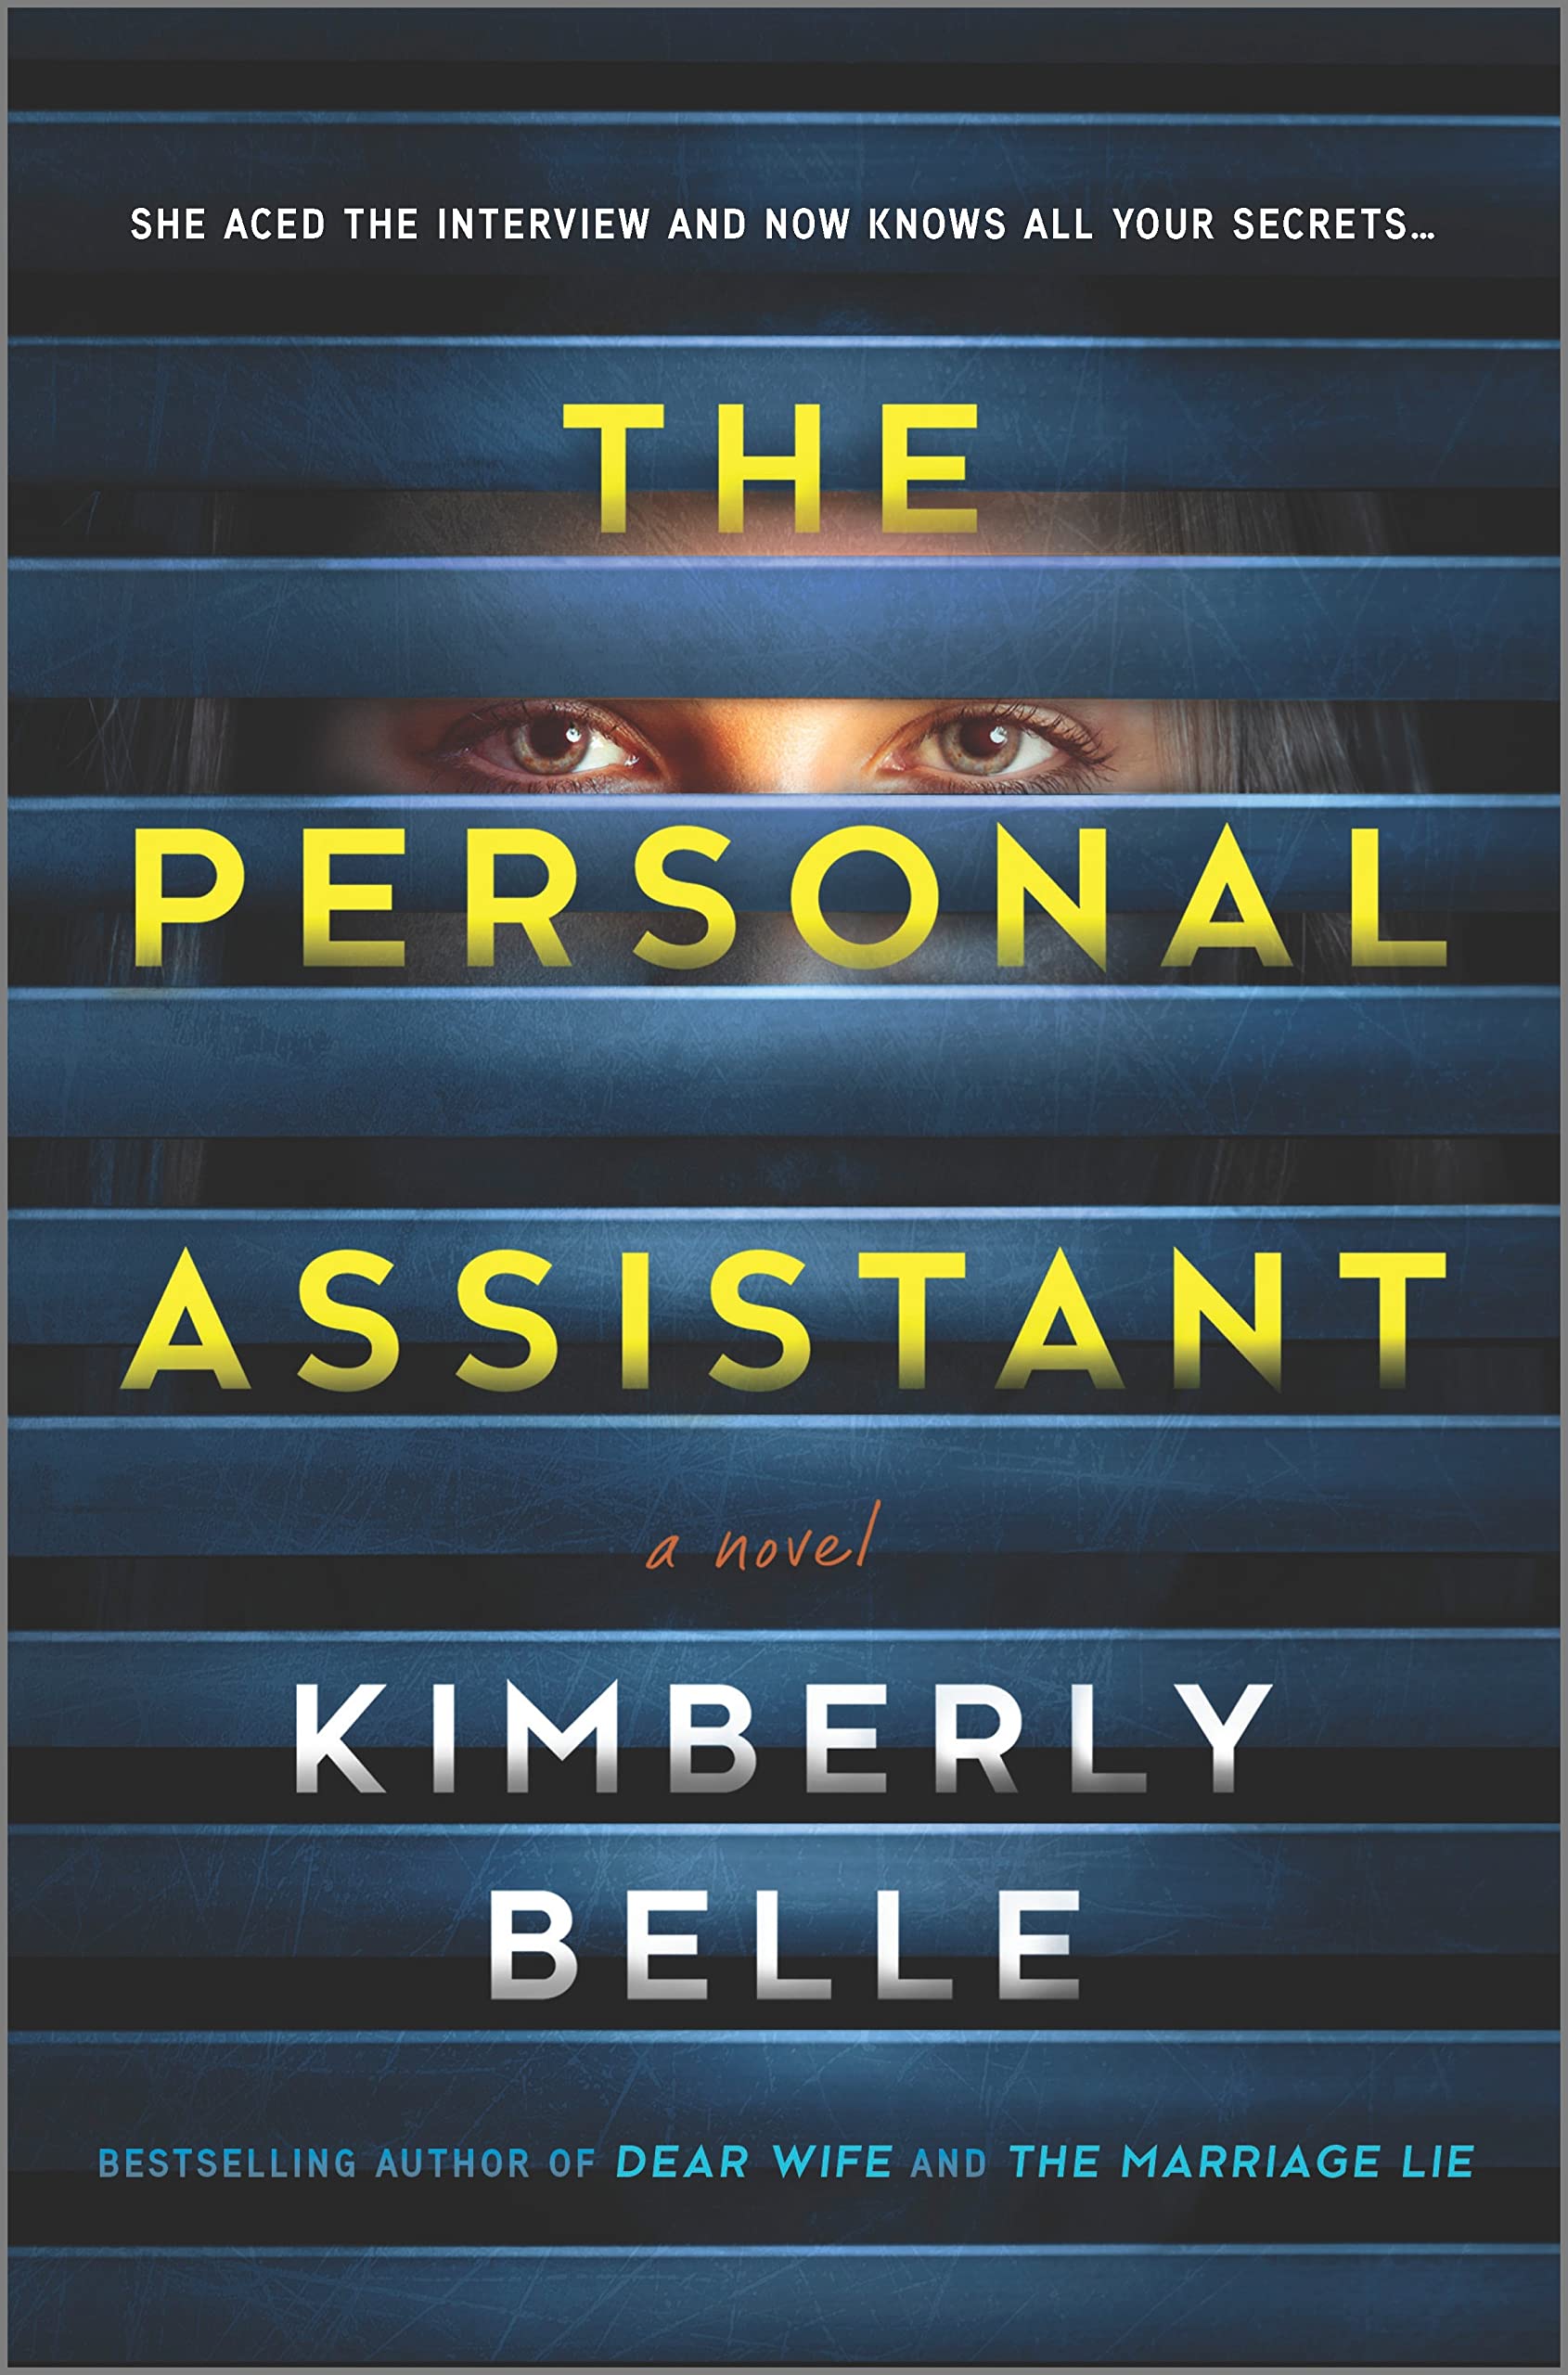 Image for "The Personal Assistant"